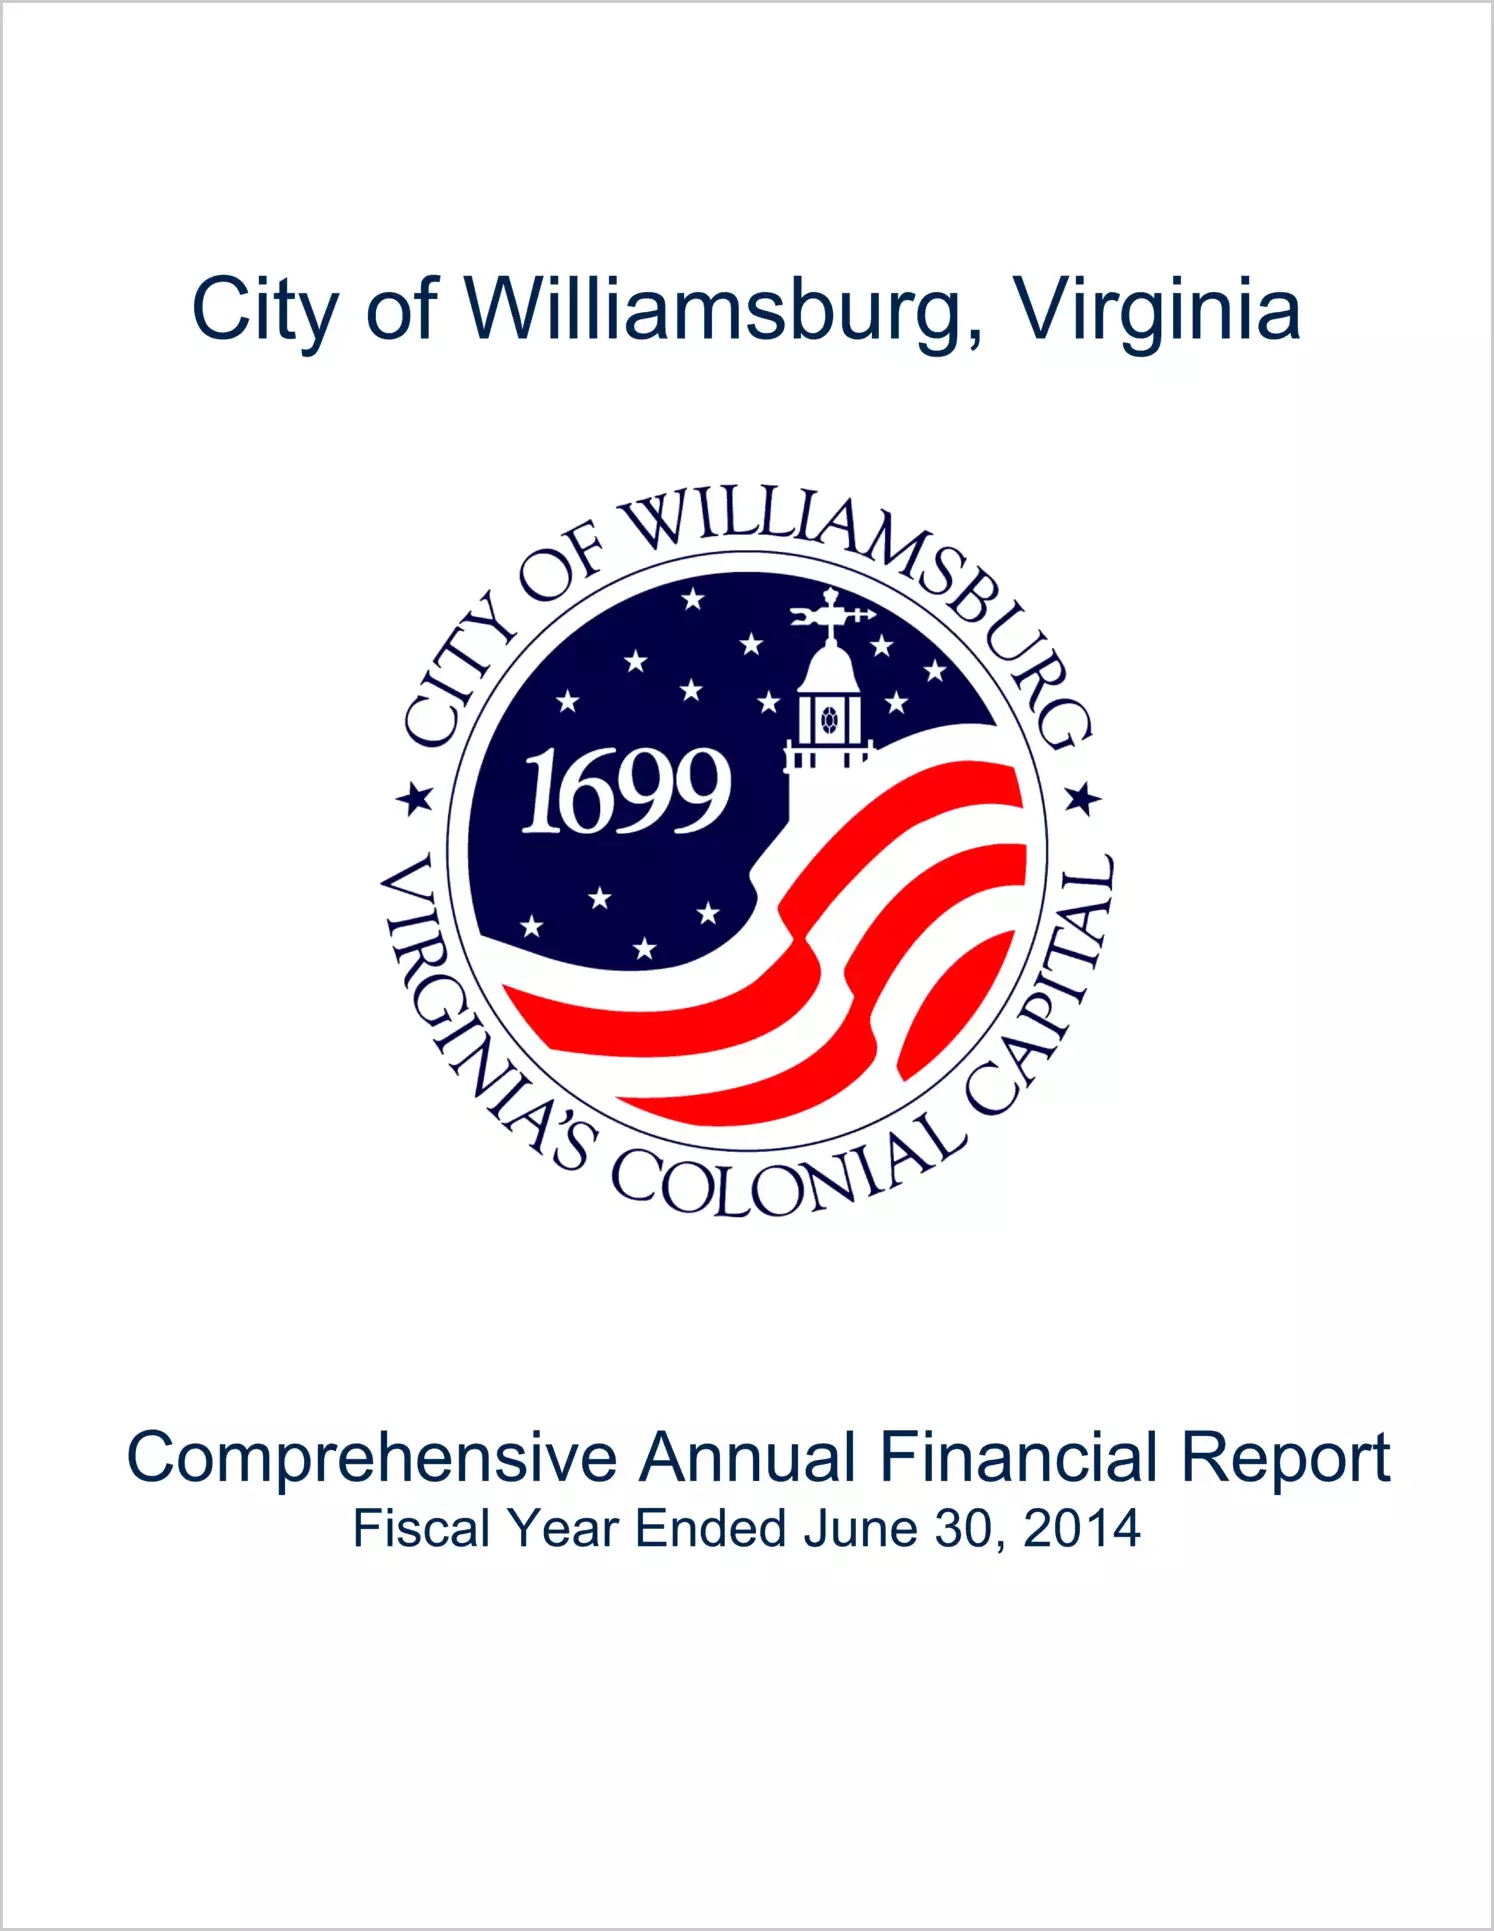 2014 Annual Financial Report for City of Williamsburg